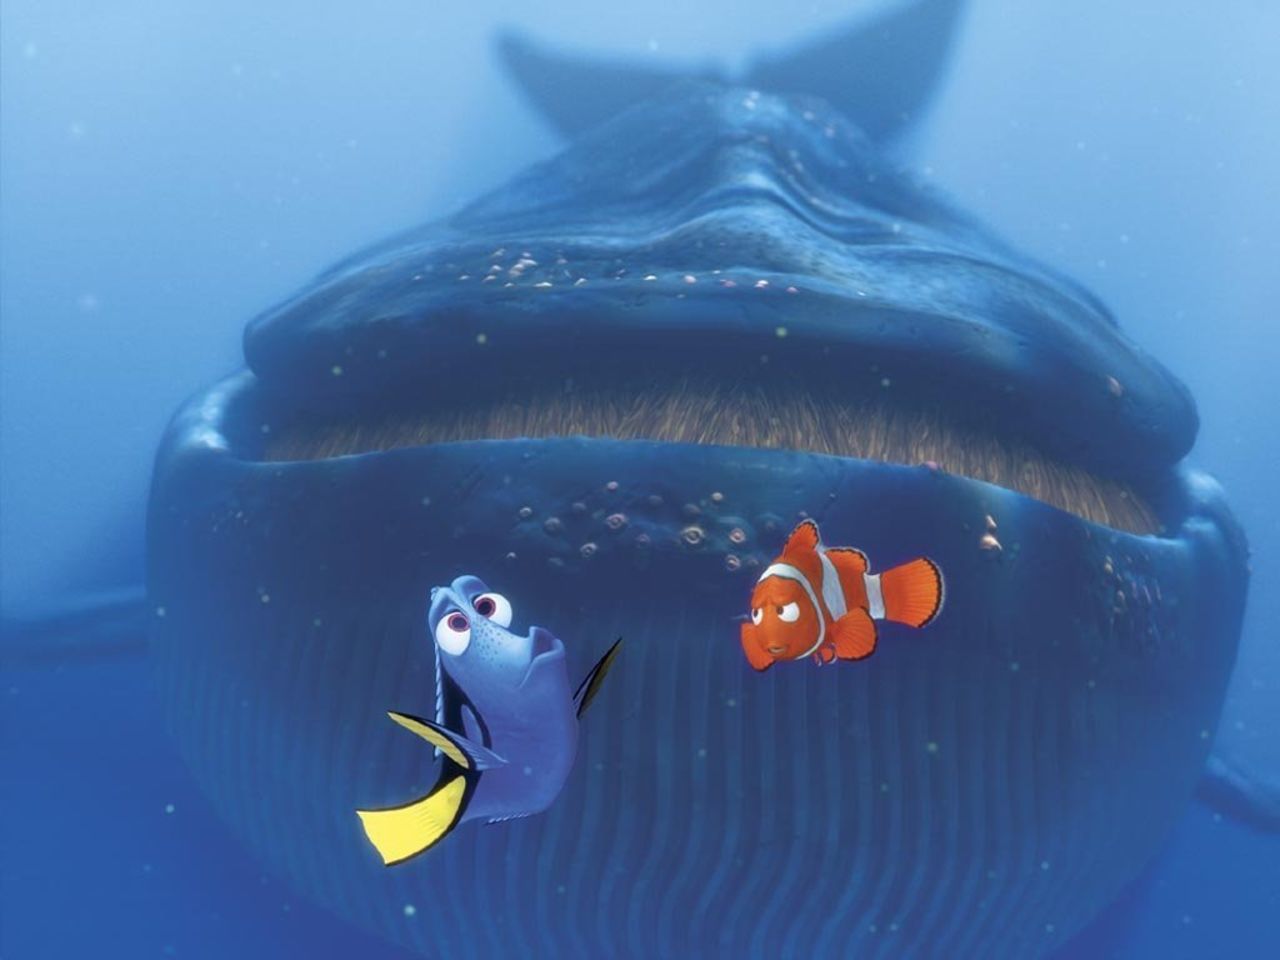 "Finding Nemo's" Dory, who starred in the 2003 Pixar film, might suffer from short-term memory loss, but the brave little regal tang wasn't afraid to stand up to sharks, jellyfish and whales on the way to P. Sherman, 42 Wallaby Way, Sydney.